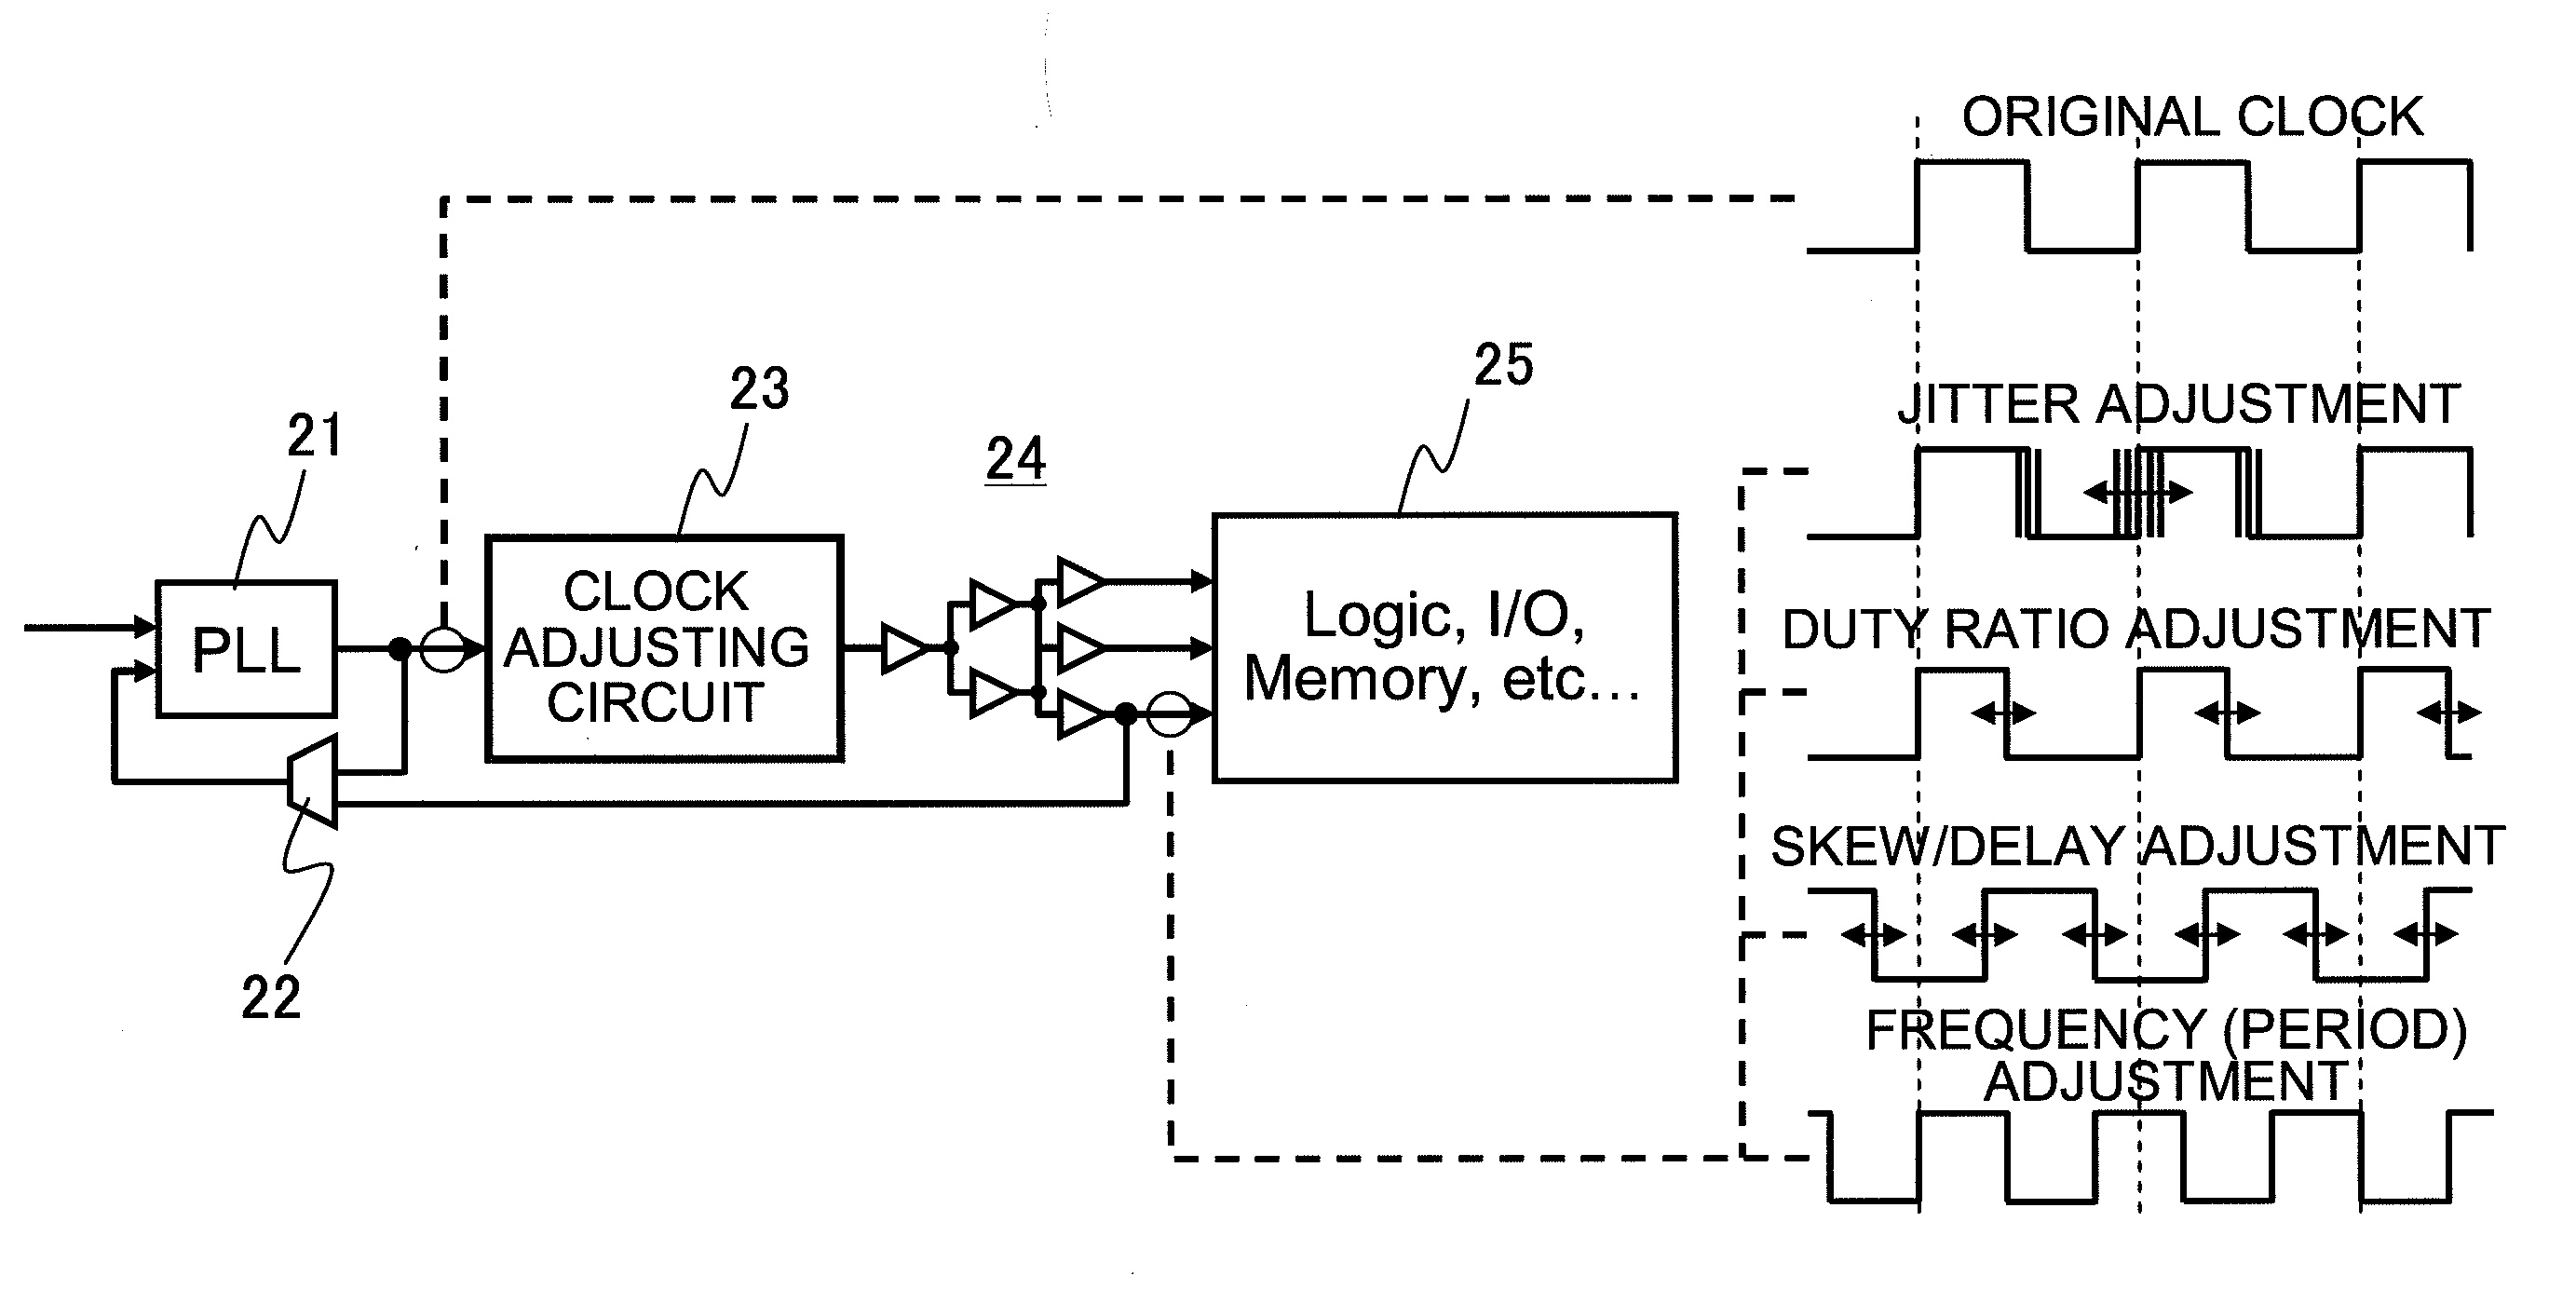 Clock adjusting circuit and semiconductor integrated circuit device